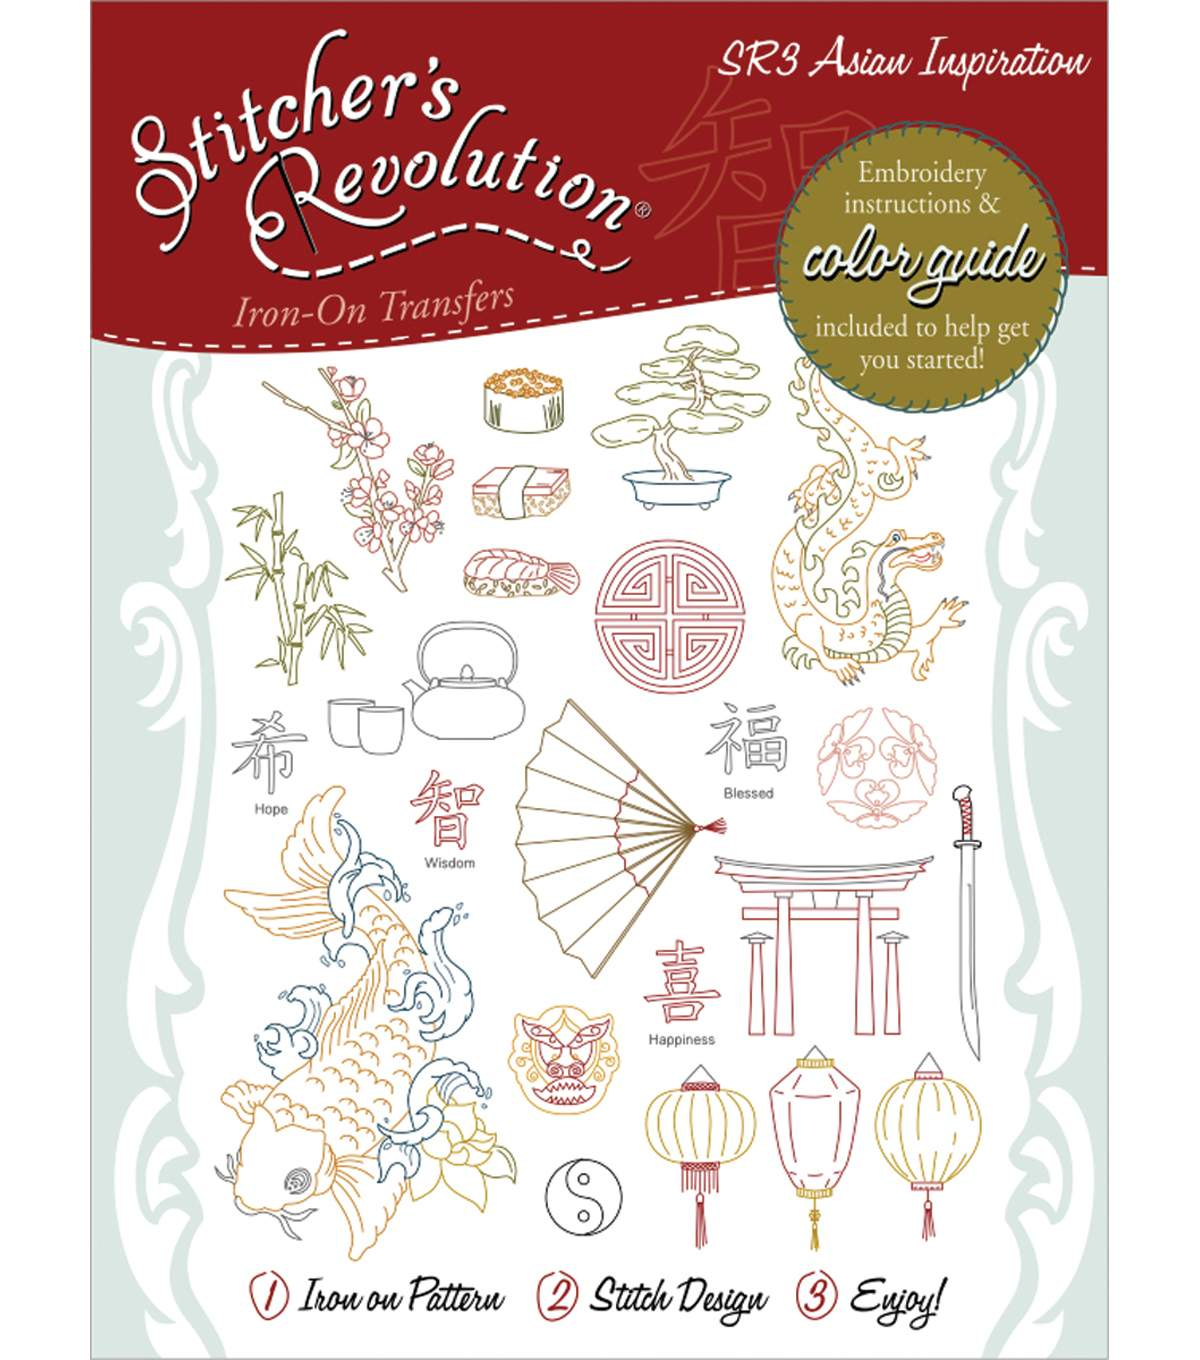 Aunt Martha Embroidery Patterns Aunt Marthas Stichers Revolution Iron On Transfers Asian Inspirations